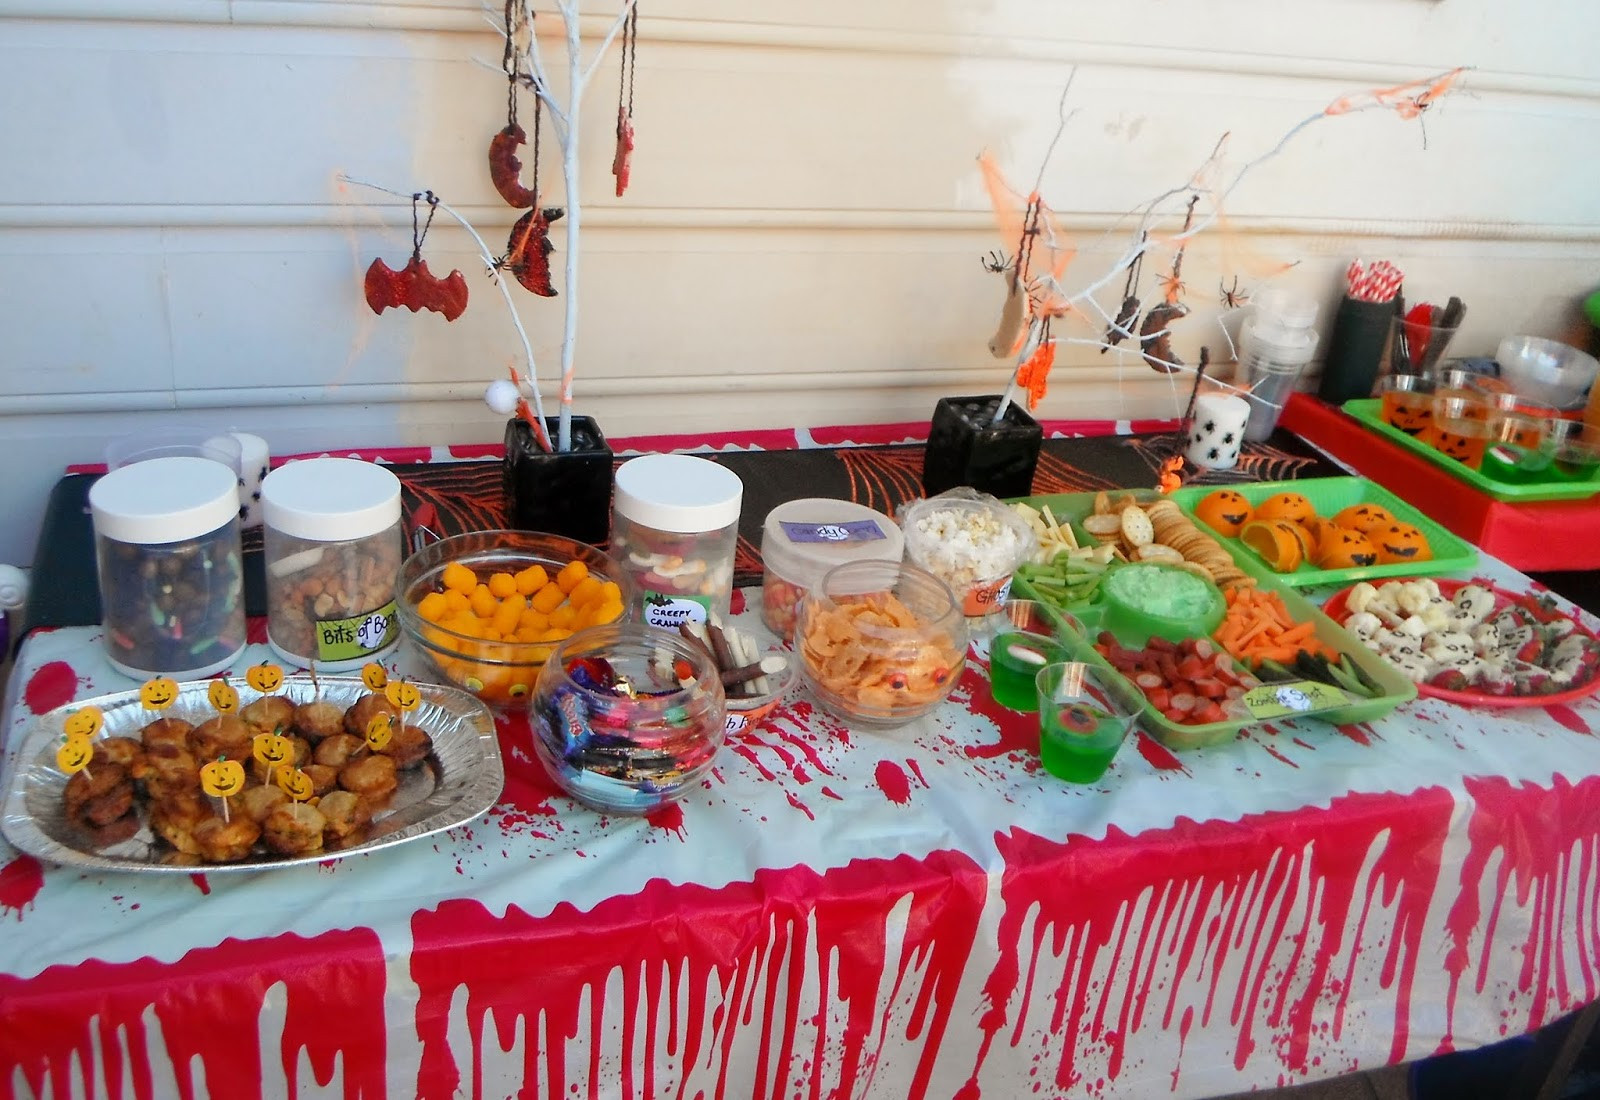 Food Halloween Party Ideas
 Adventures at home with Mum Halloween Party Food